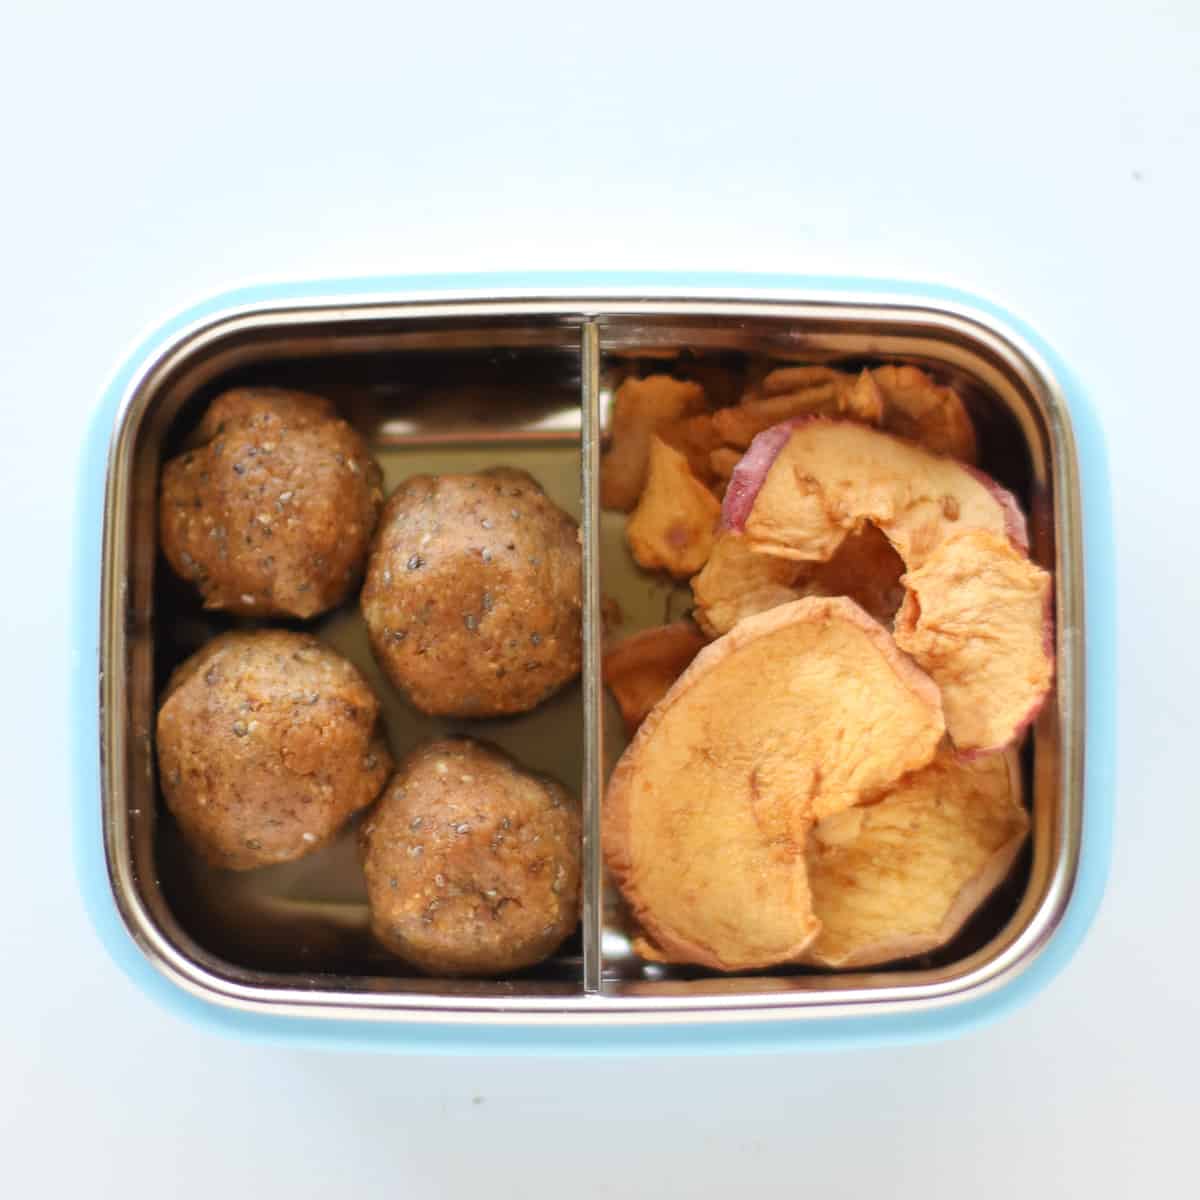 Pumpkin balls with apple chips in a snack container.